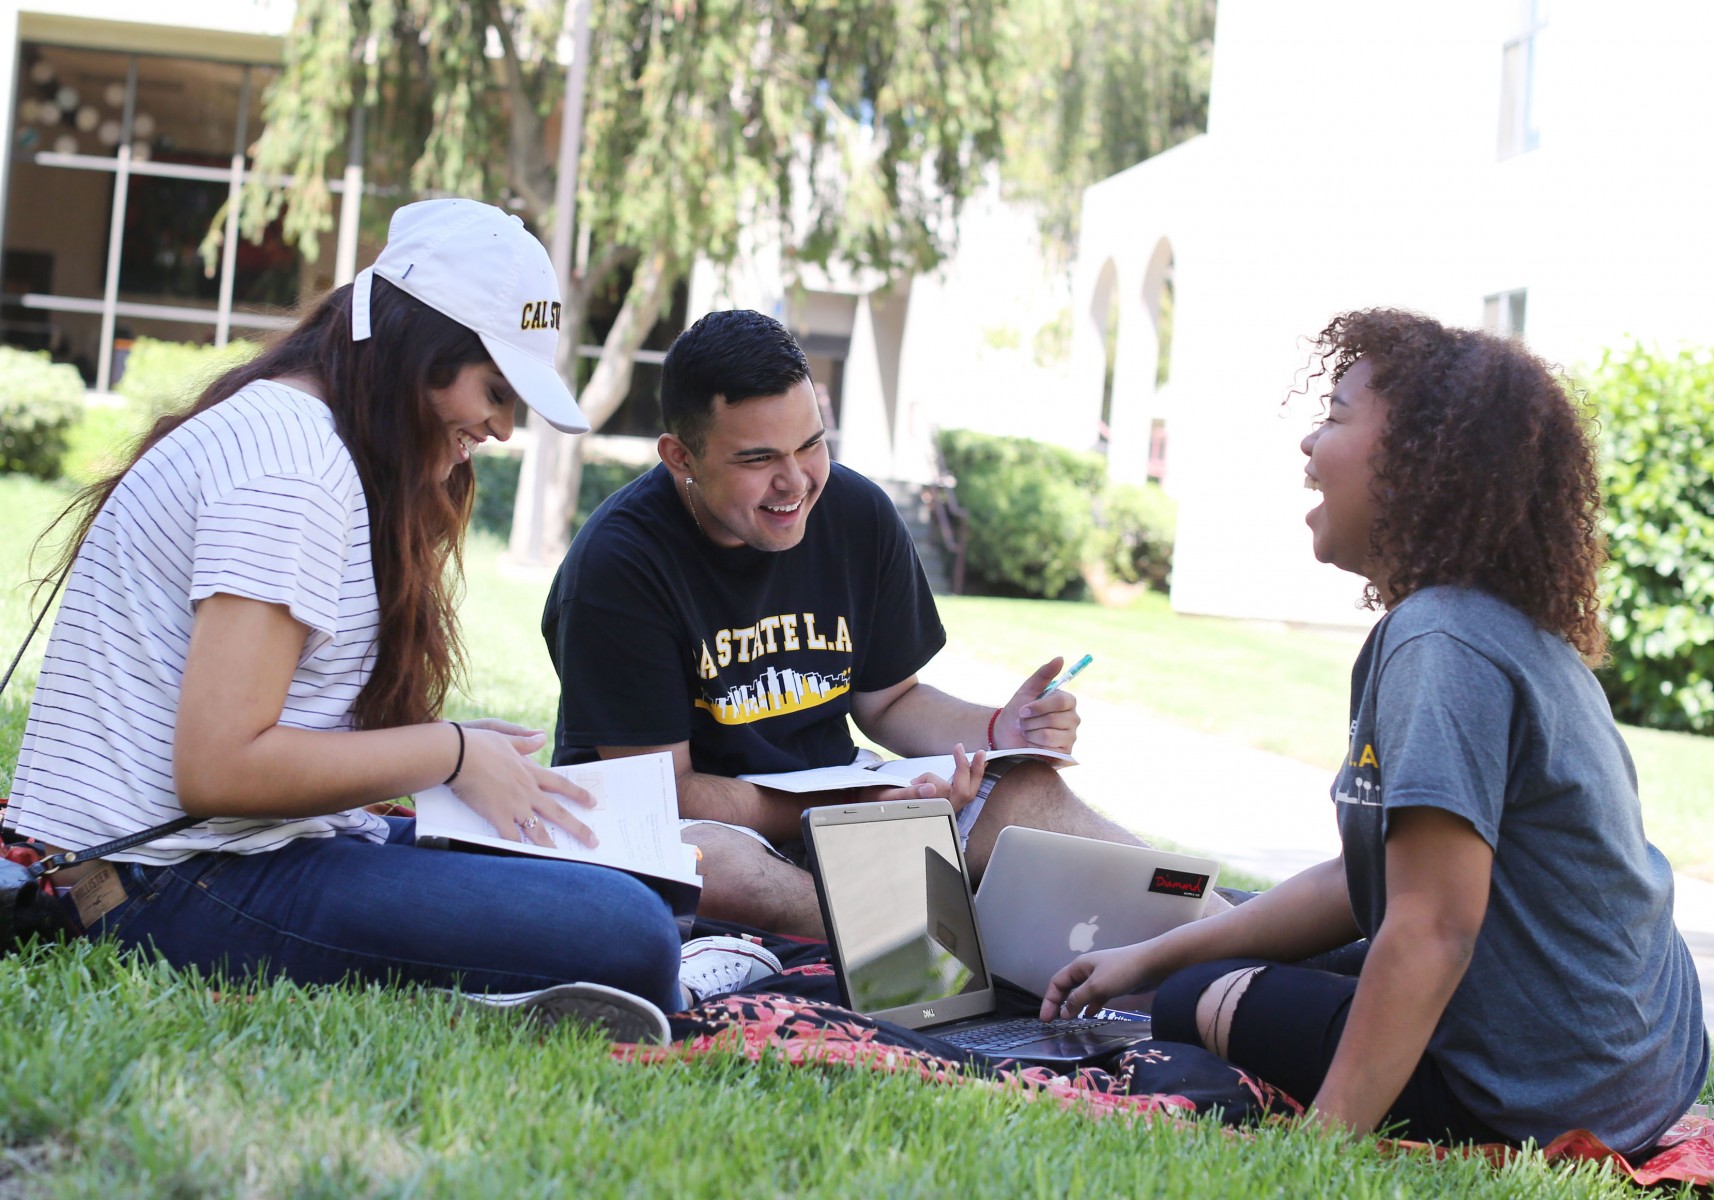 Three students sitting outdoors on a lawn, studying and smiling.